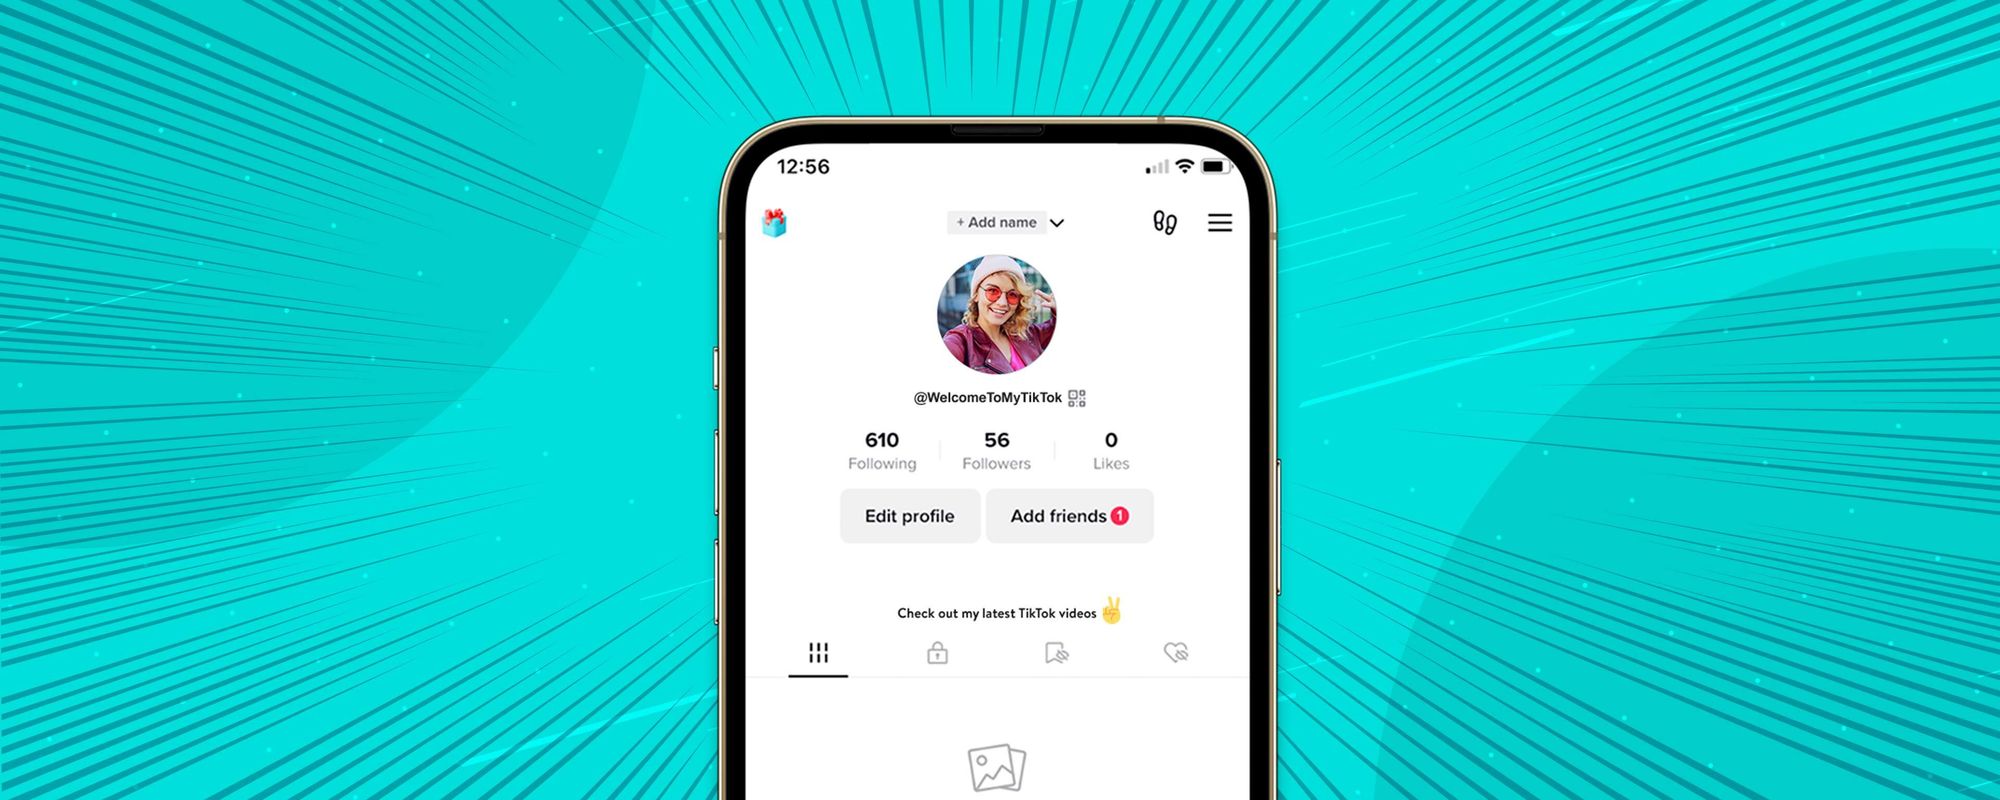 Image of a phone display showing how a creator can make a TikTok account.